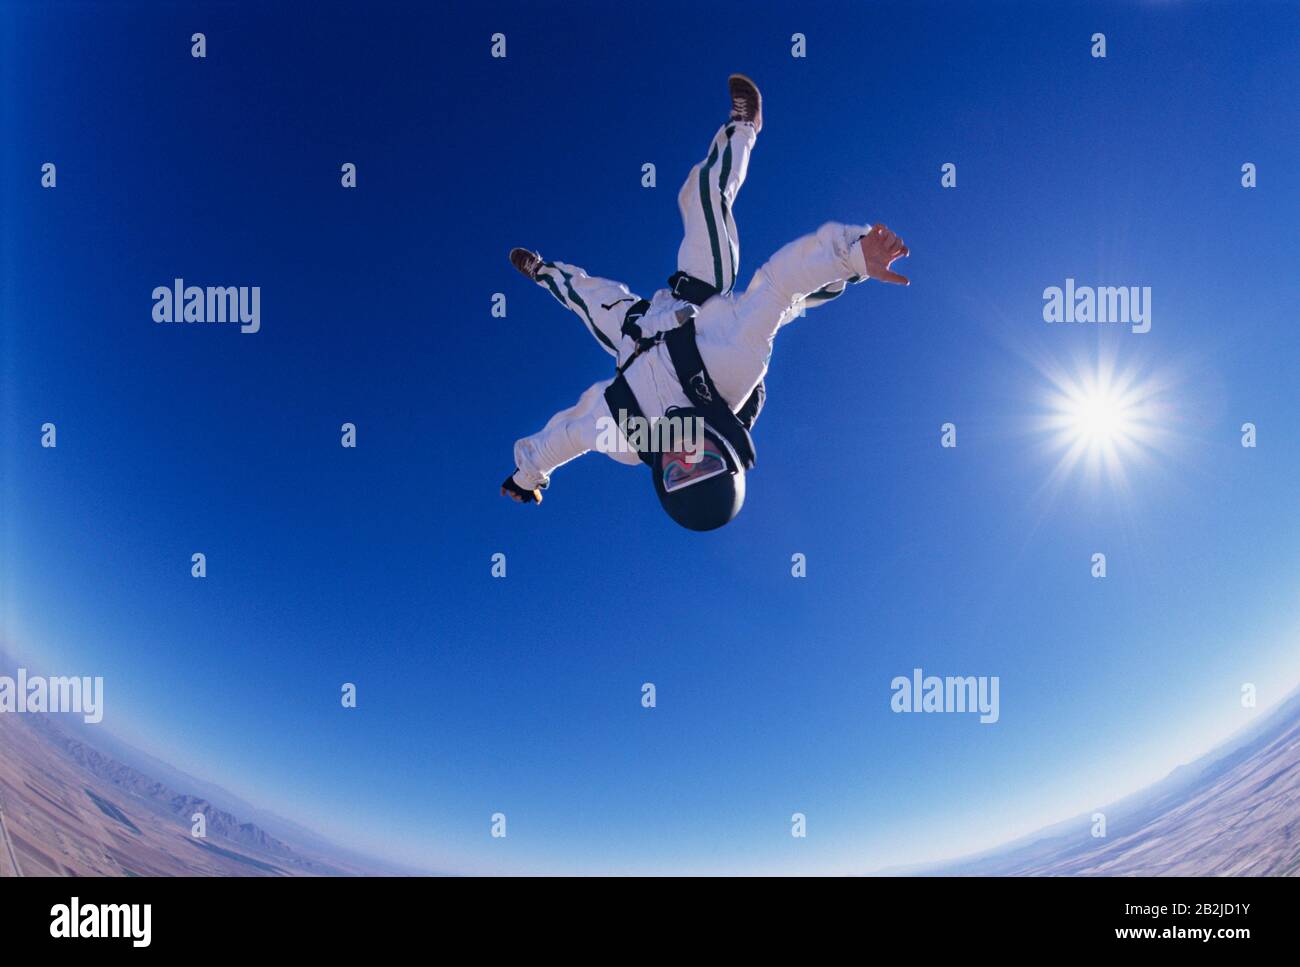 Skydiver free falling upside down portrait view from below Stock Photo